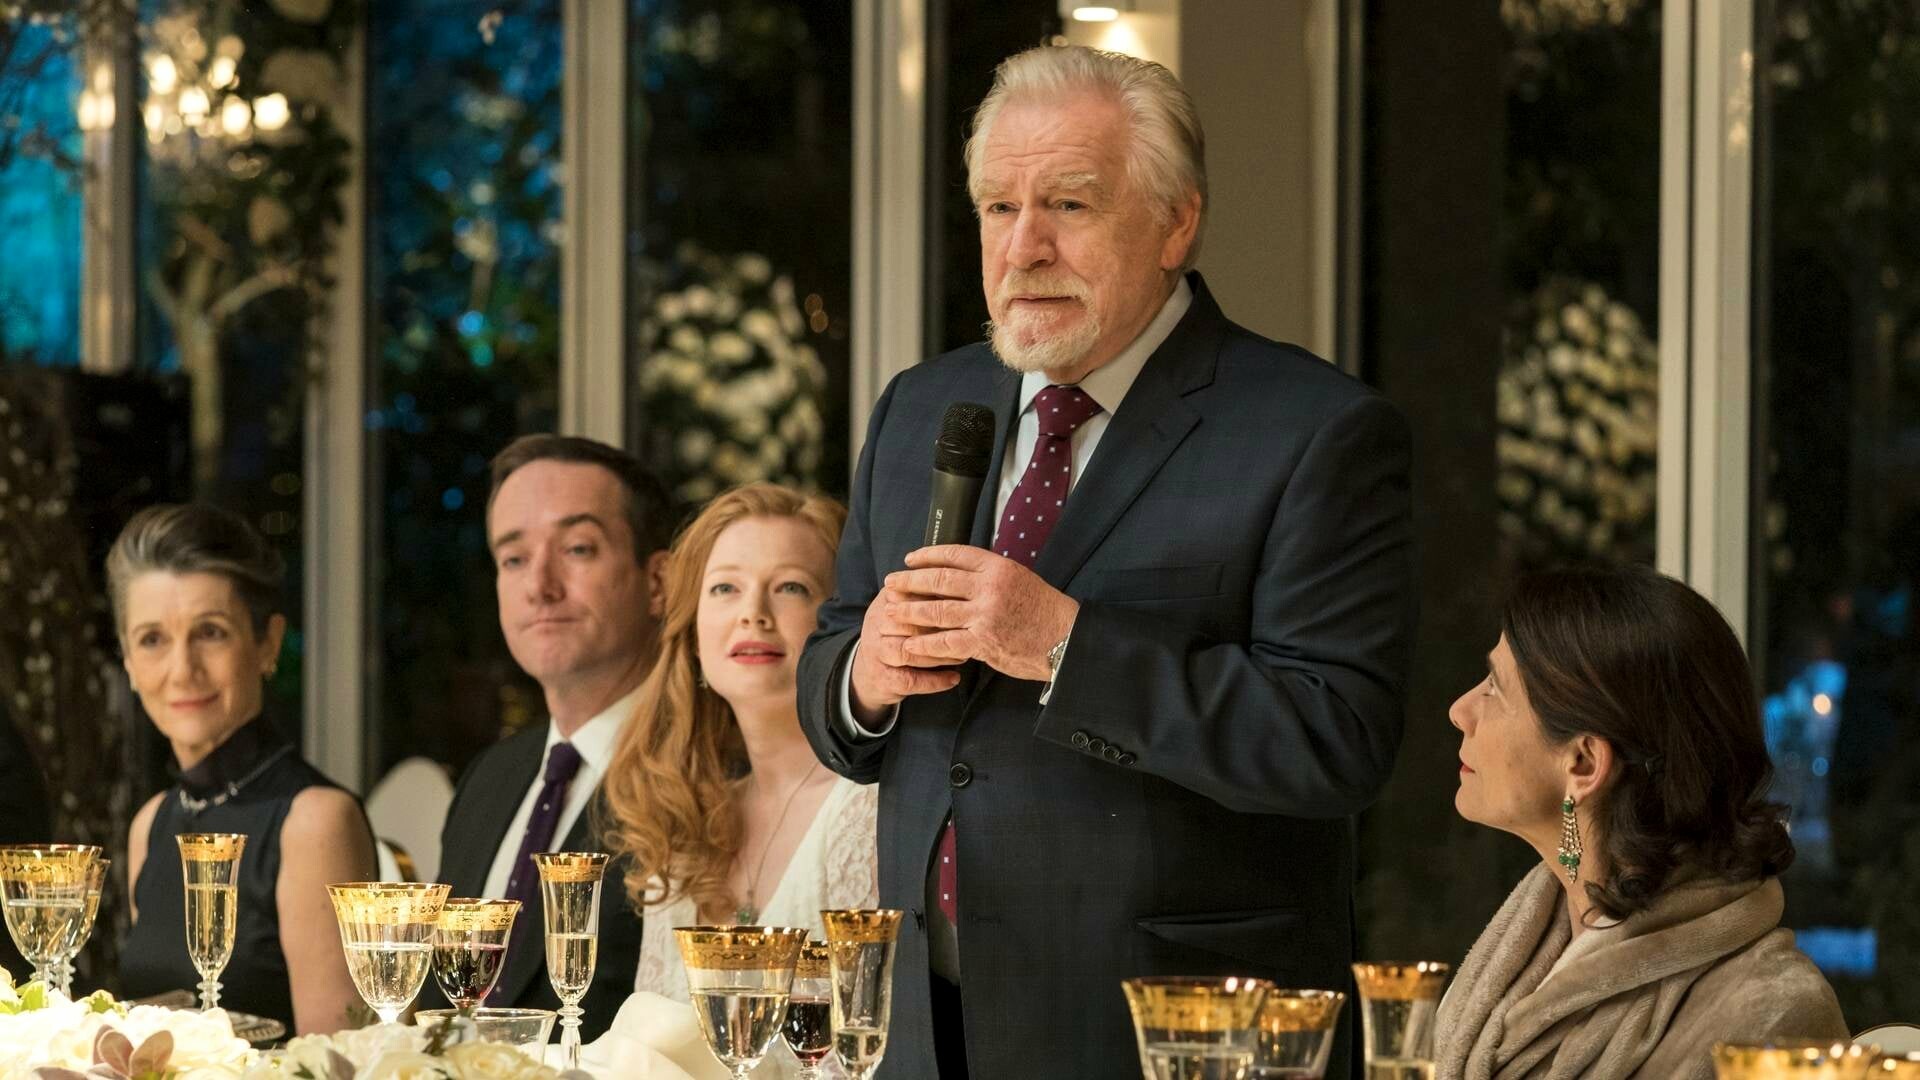 Succession (TV Series): The Roy Family, the dysfunctional owners of a global media empire. 1920x1080 Full HD Wallpaper.